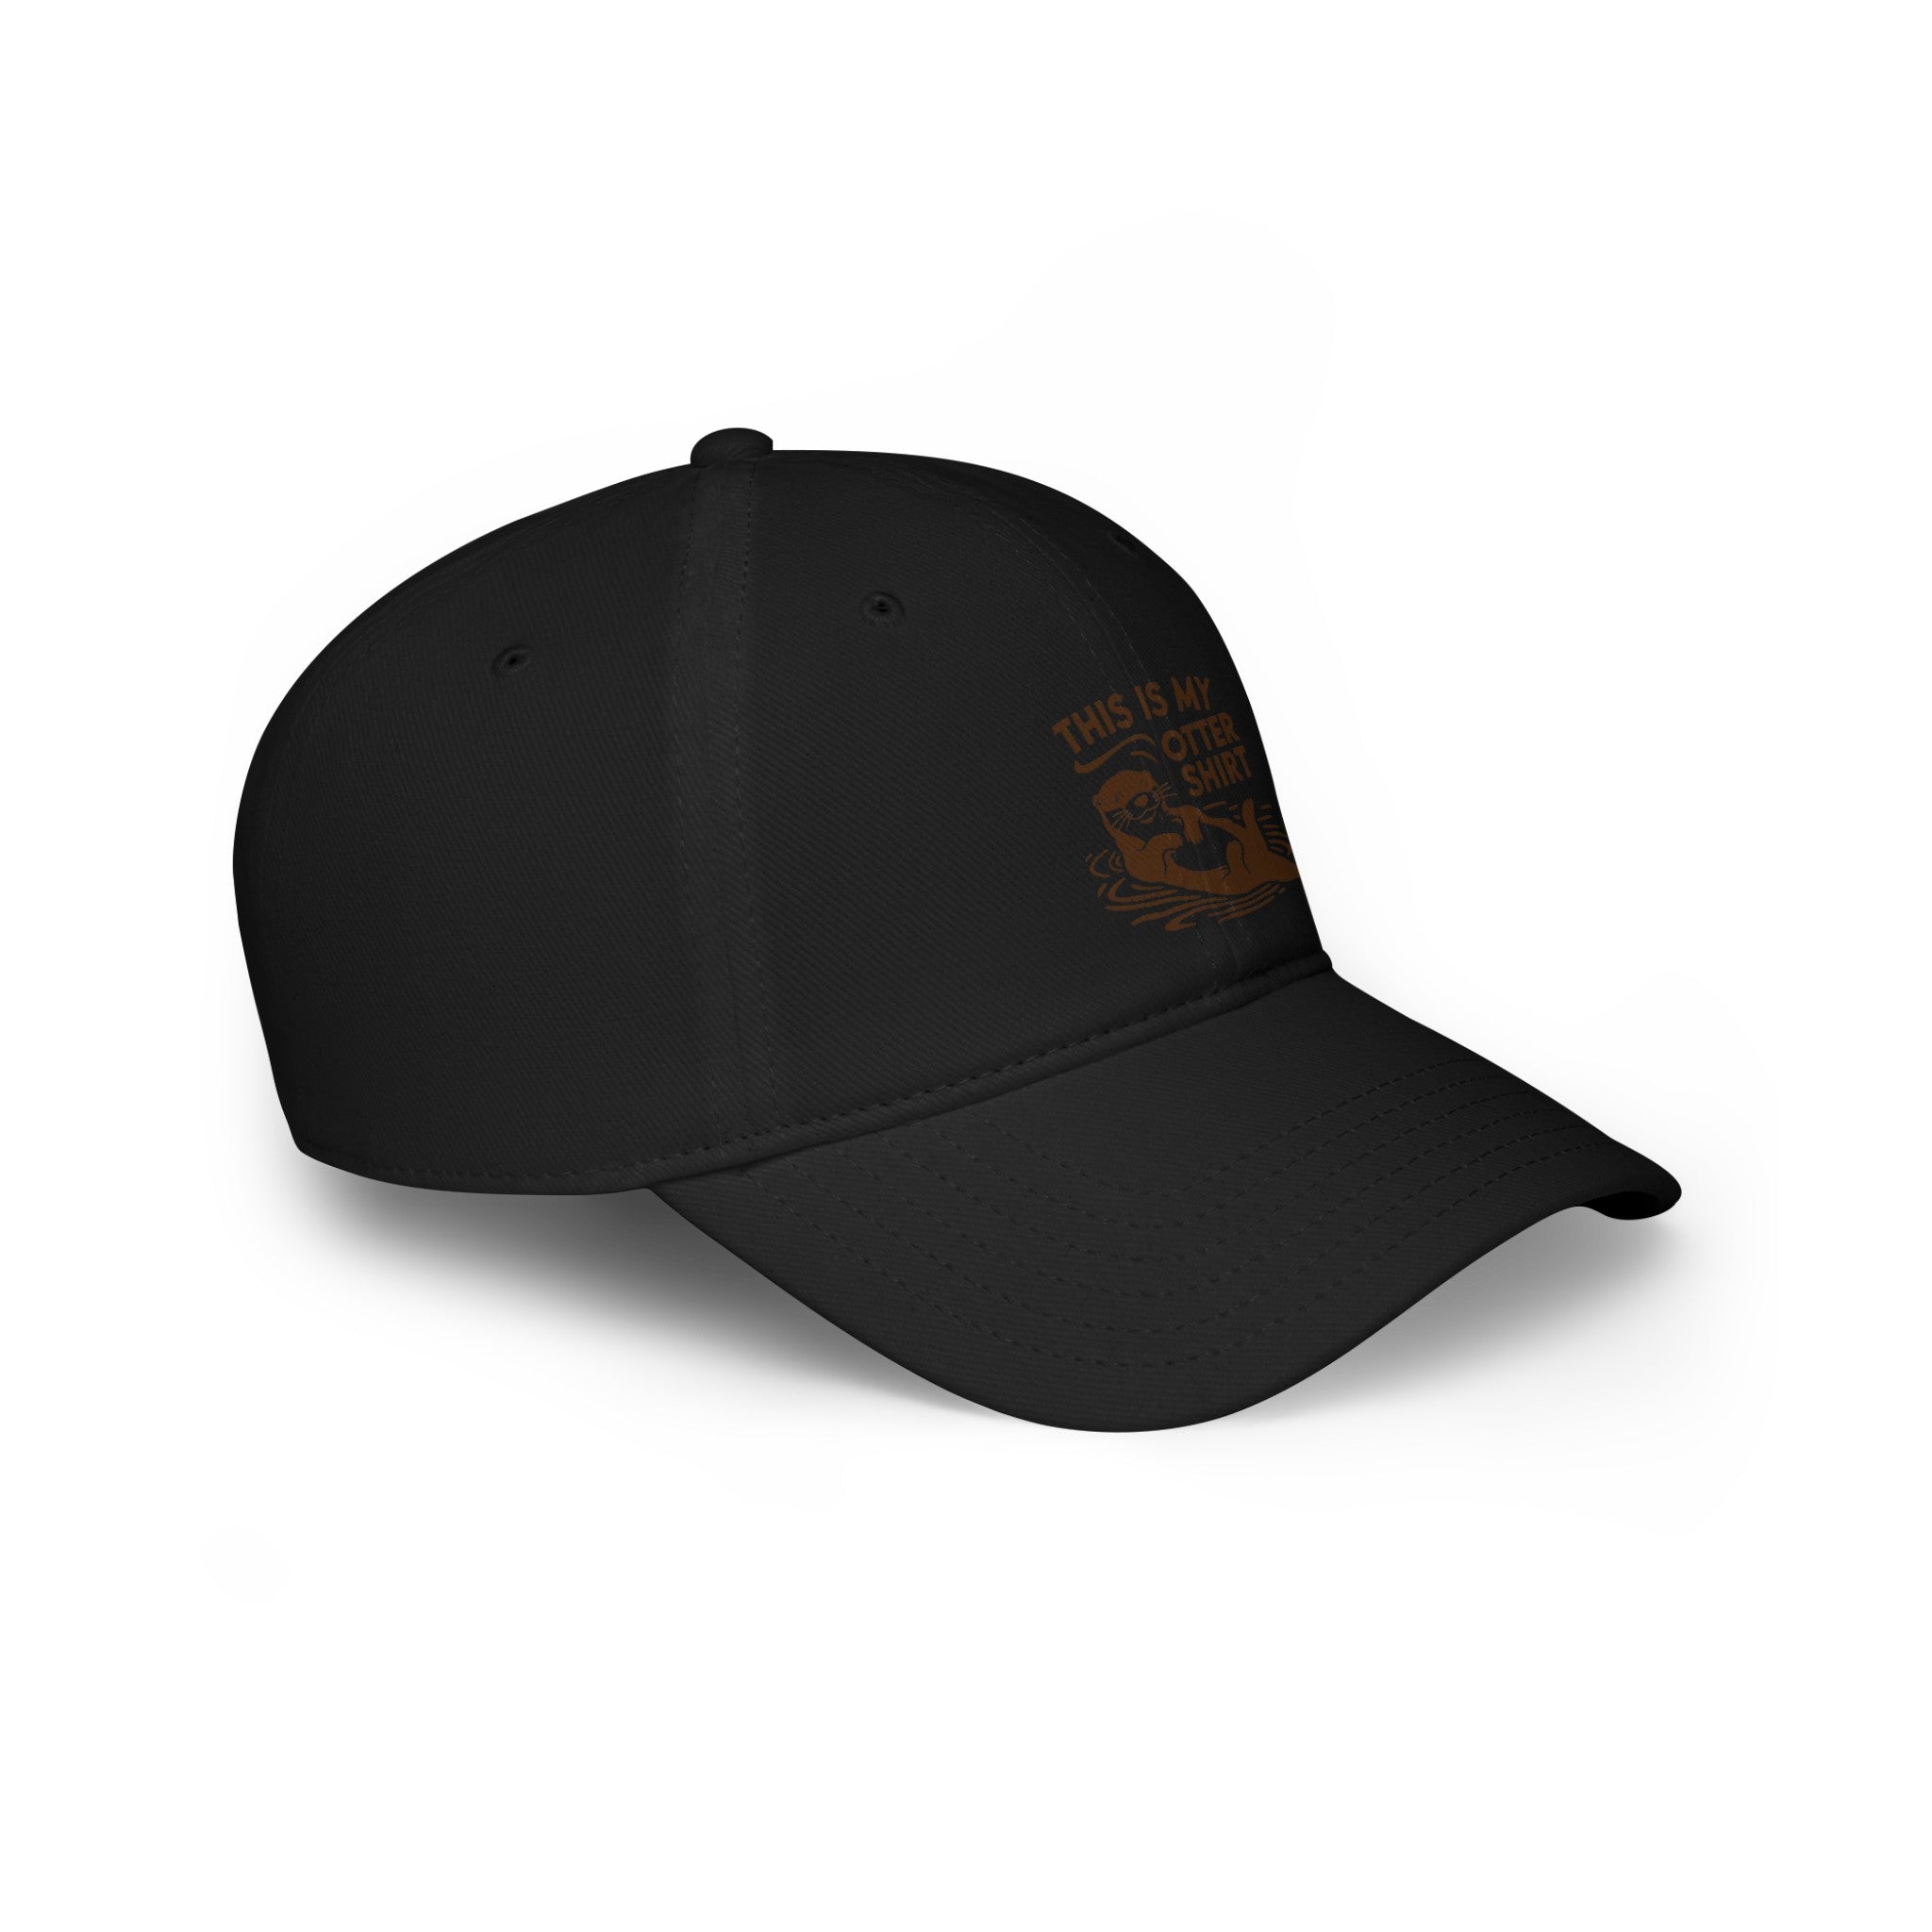 Black baseball cap with curved visor. Front design features a graphic and text saying, "My Otter Shirt - Hat." Offers exceptional comfort for everyday wear and a unique style perfect for any casual outfit.